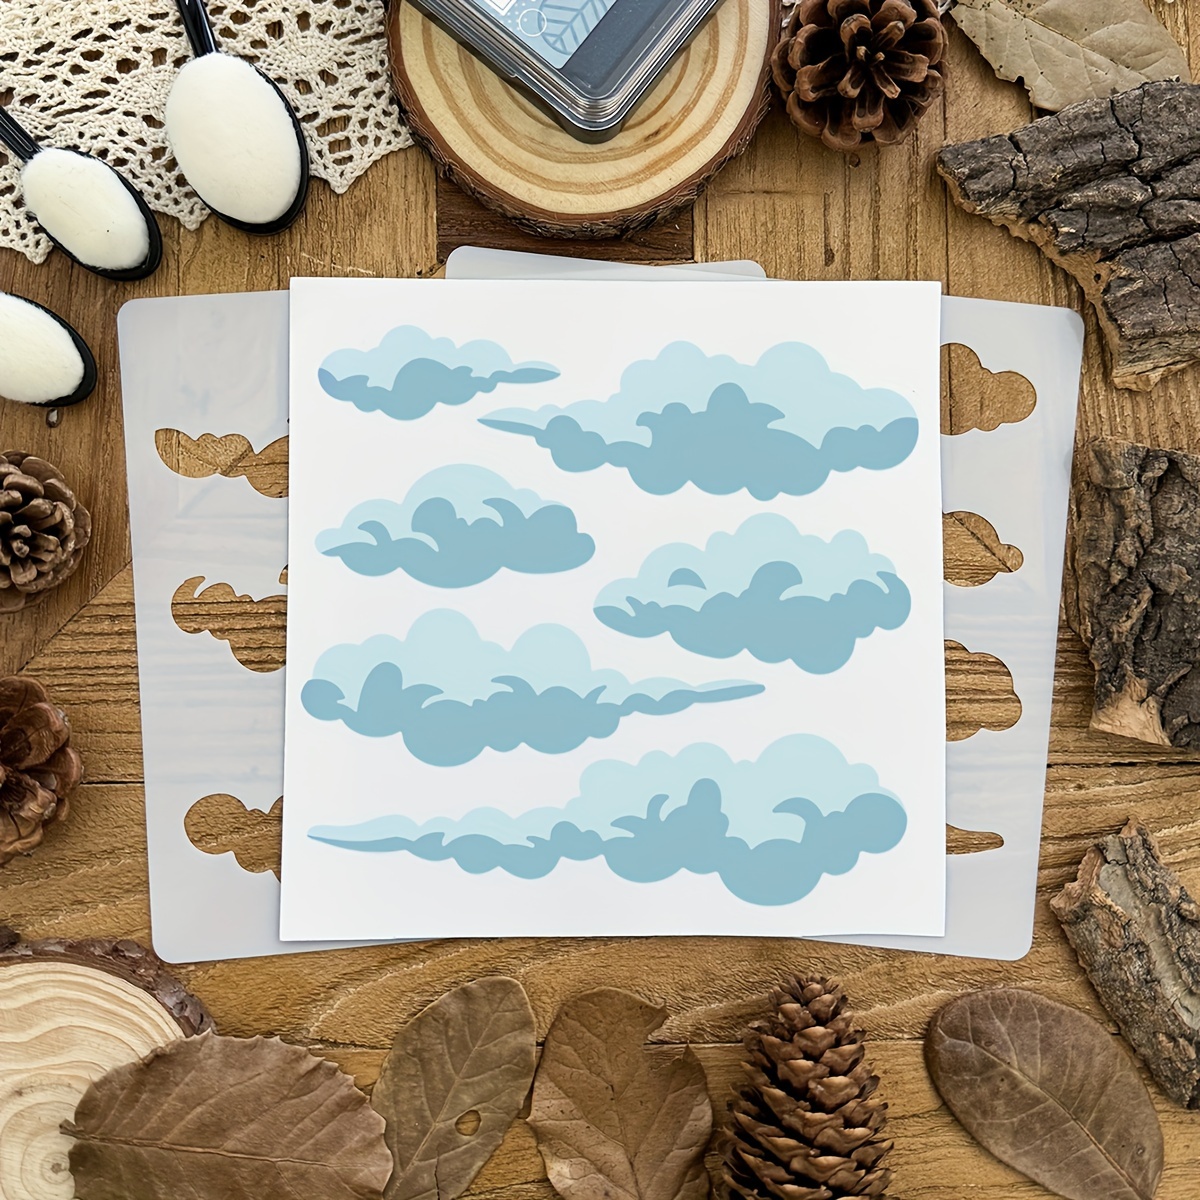 

2pcs Lovely Layers Sky Clouds Nature Stencils For Diy Scrapbook, Painting, Embossing, Plastic Template Set 6x6 Inch